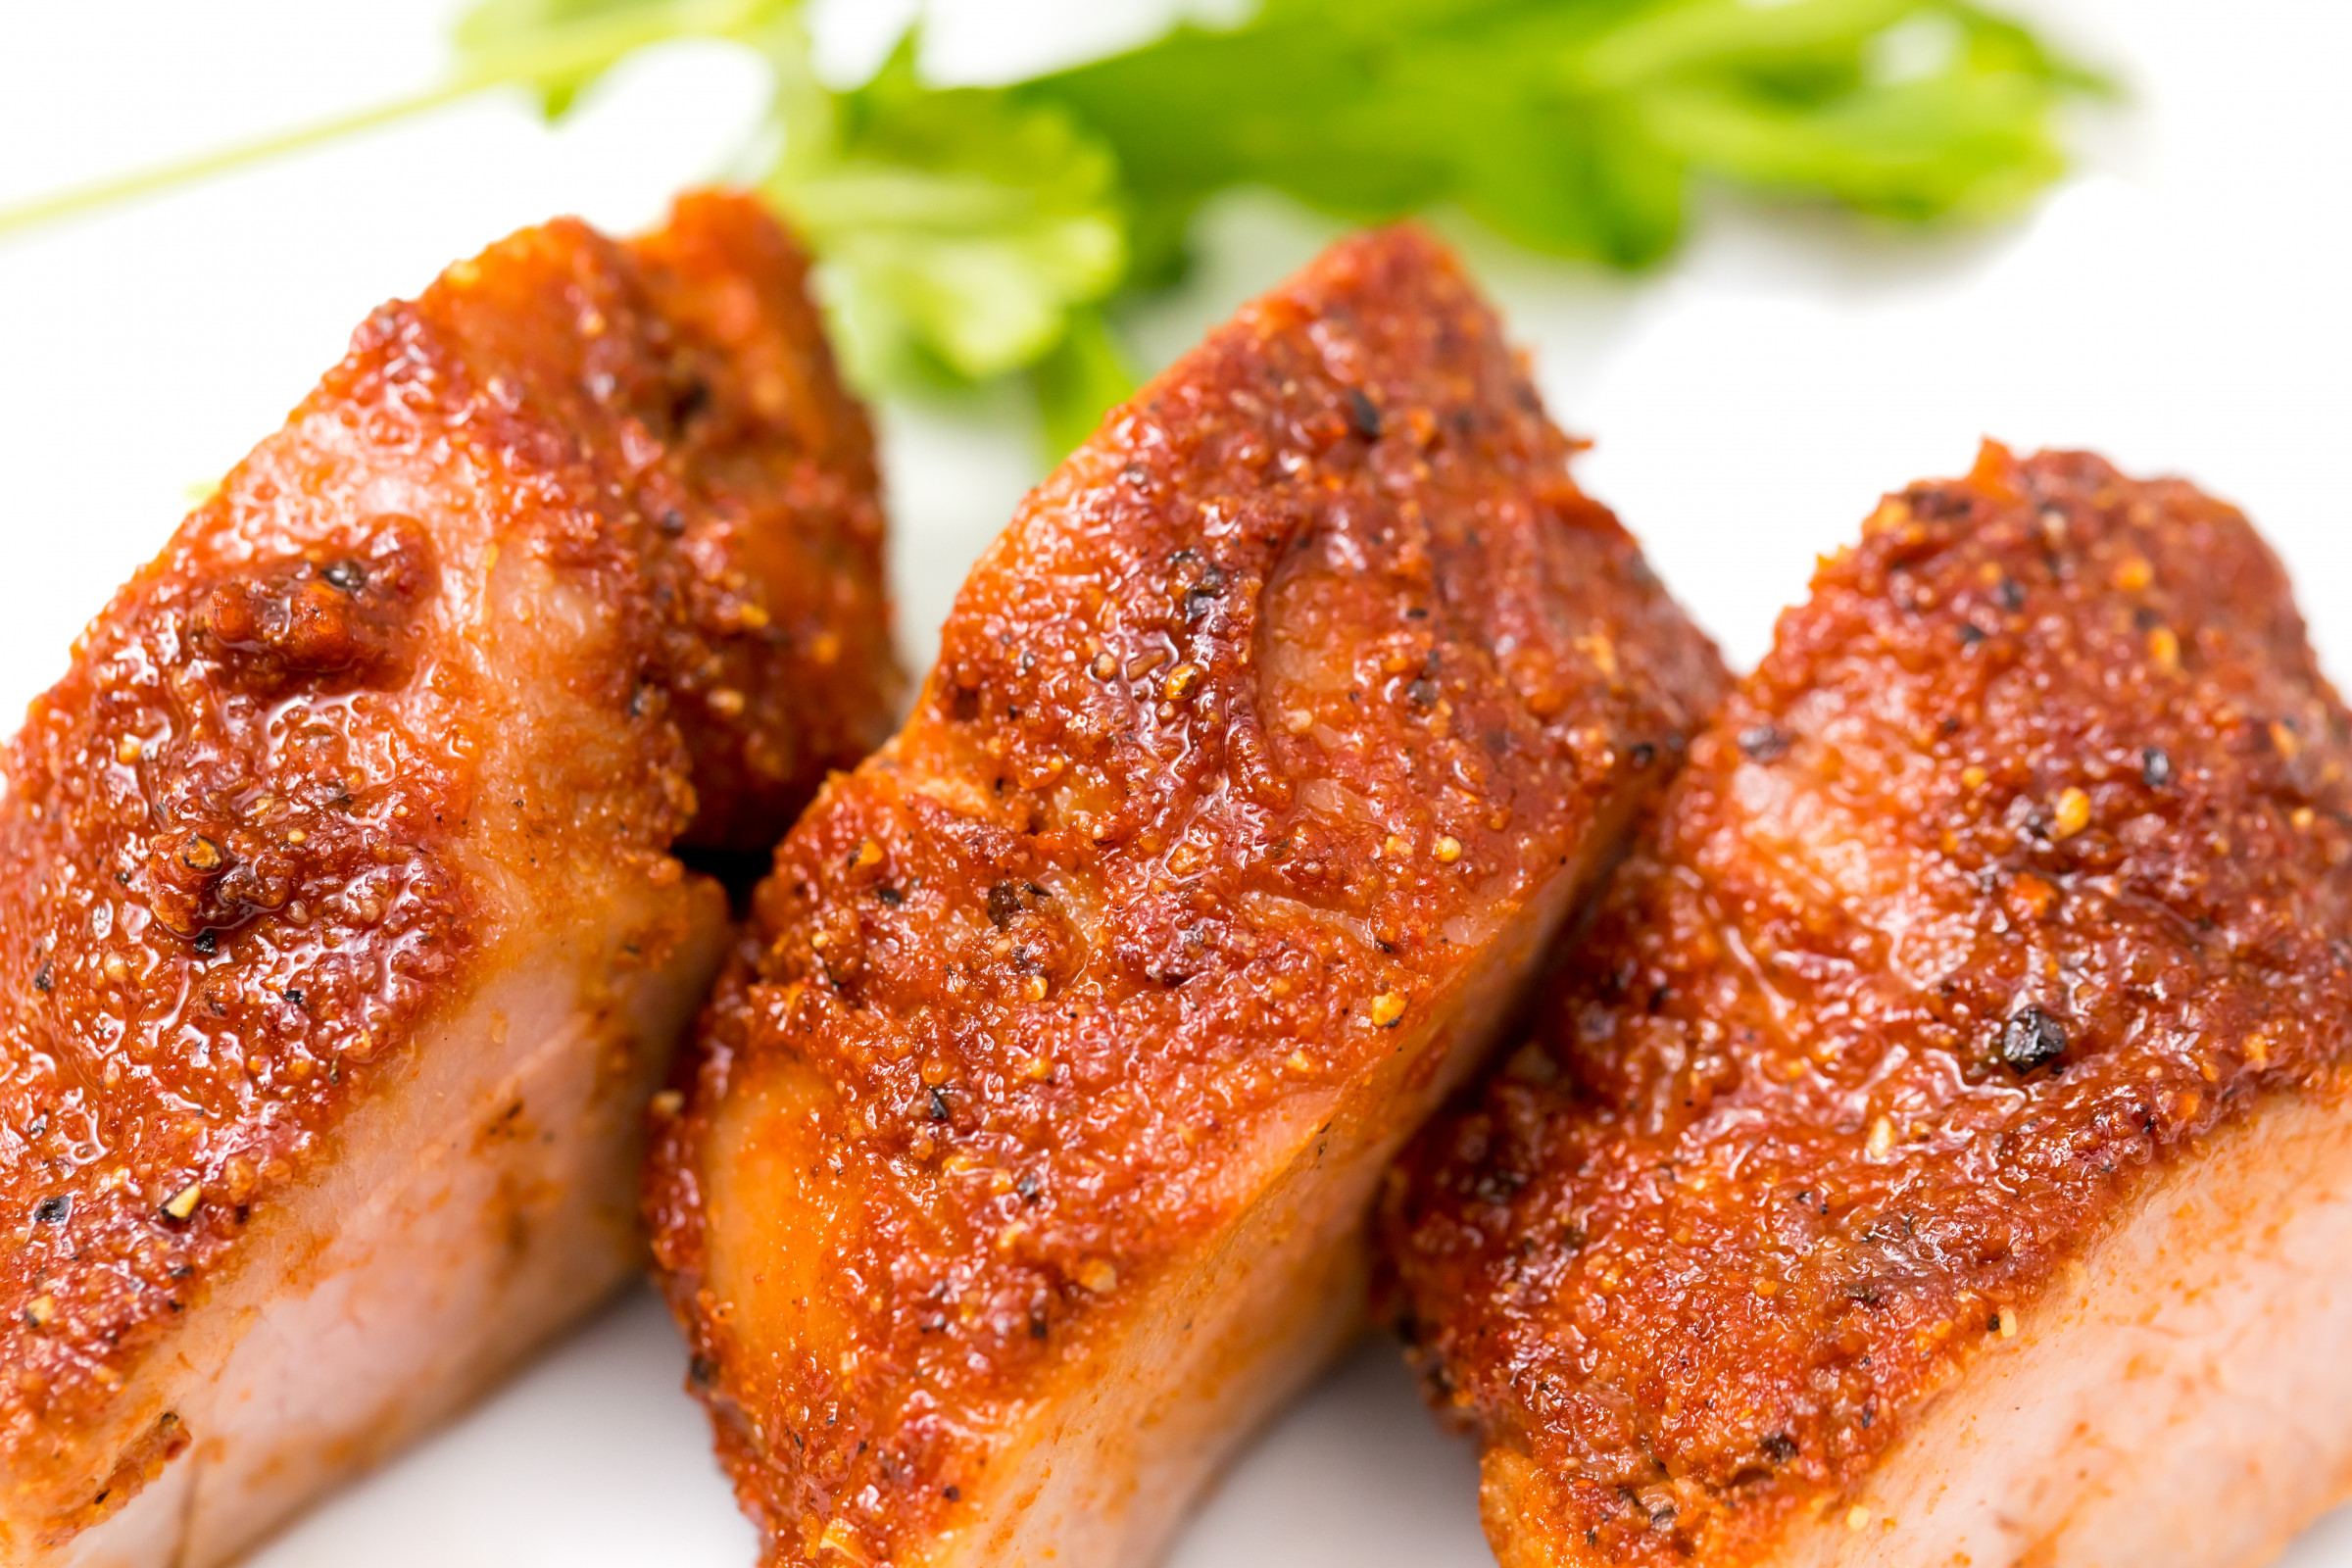 Try This Pork Tenderloin Recipe With Sweet Spicy Rub For Dinner